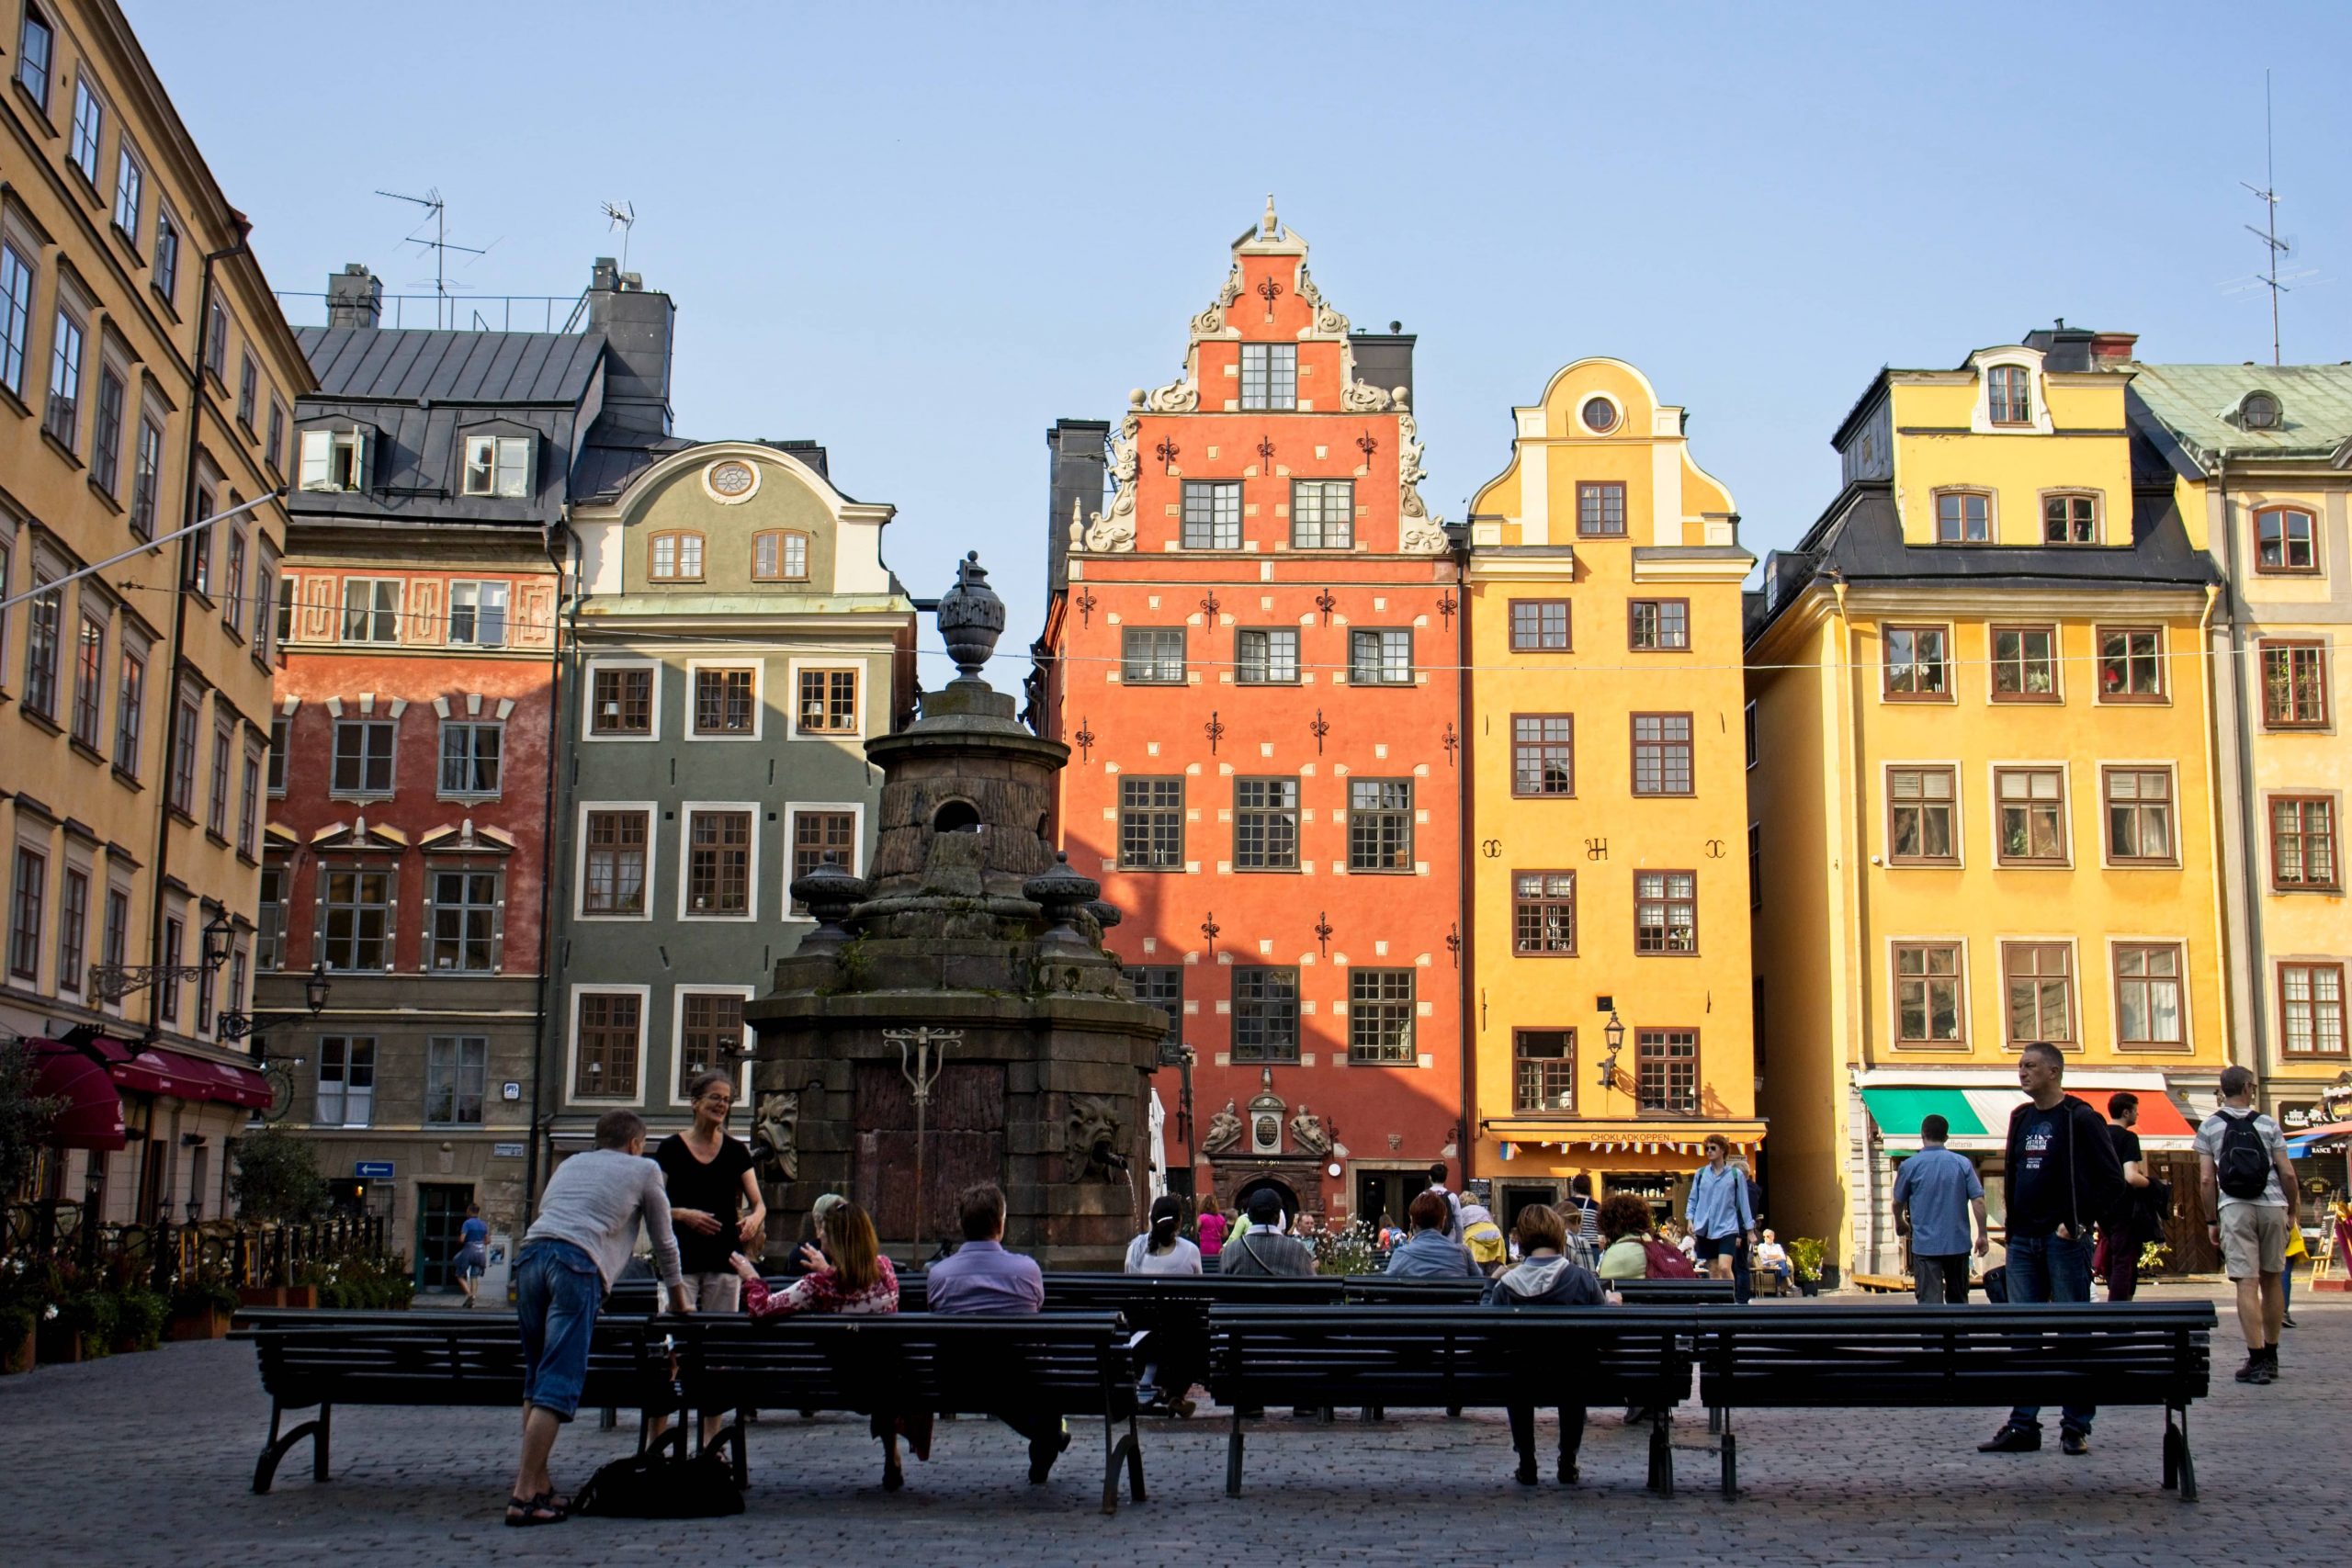 People on benches in Stockholm Sweden